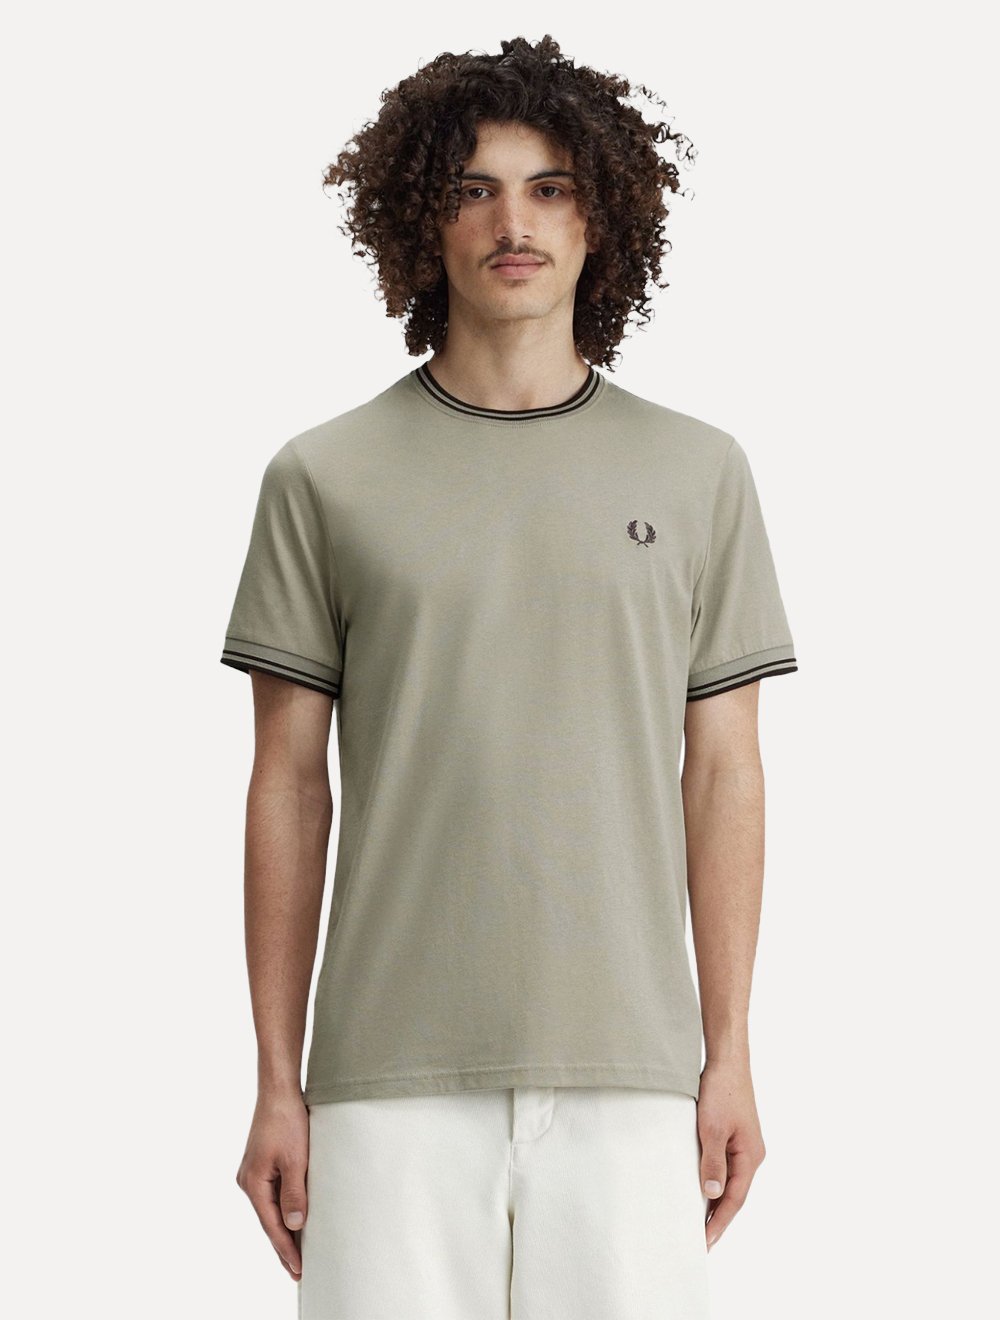 Camiseta Fred Perry Masculina Regular Brown Twin Tipped Cinza